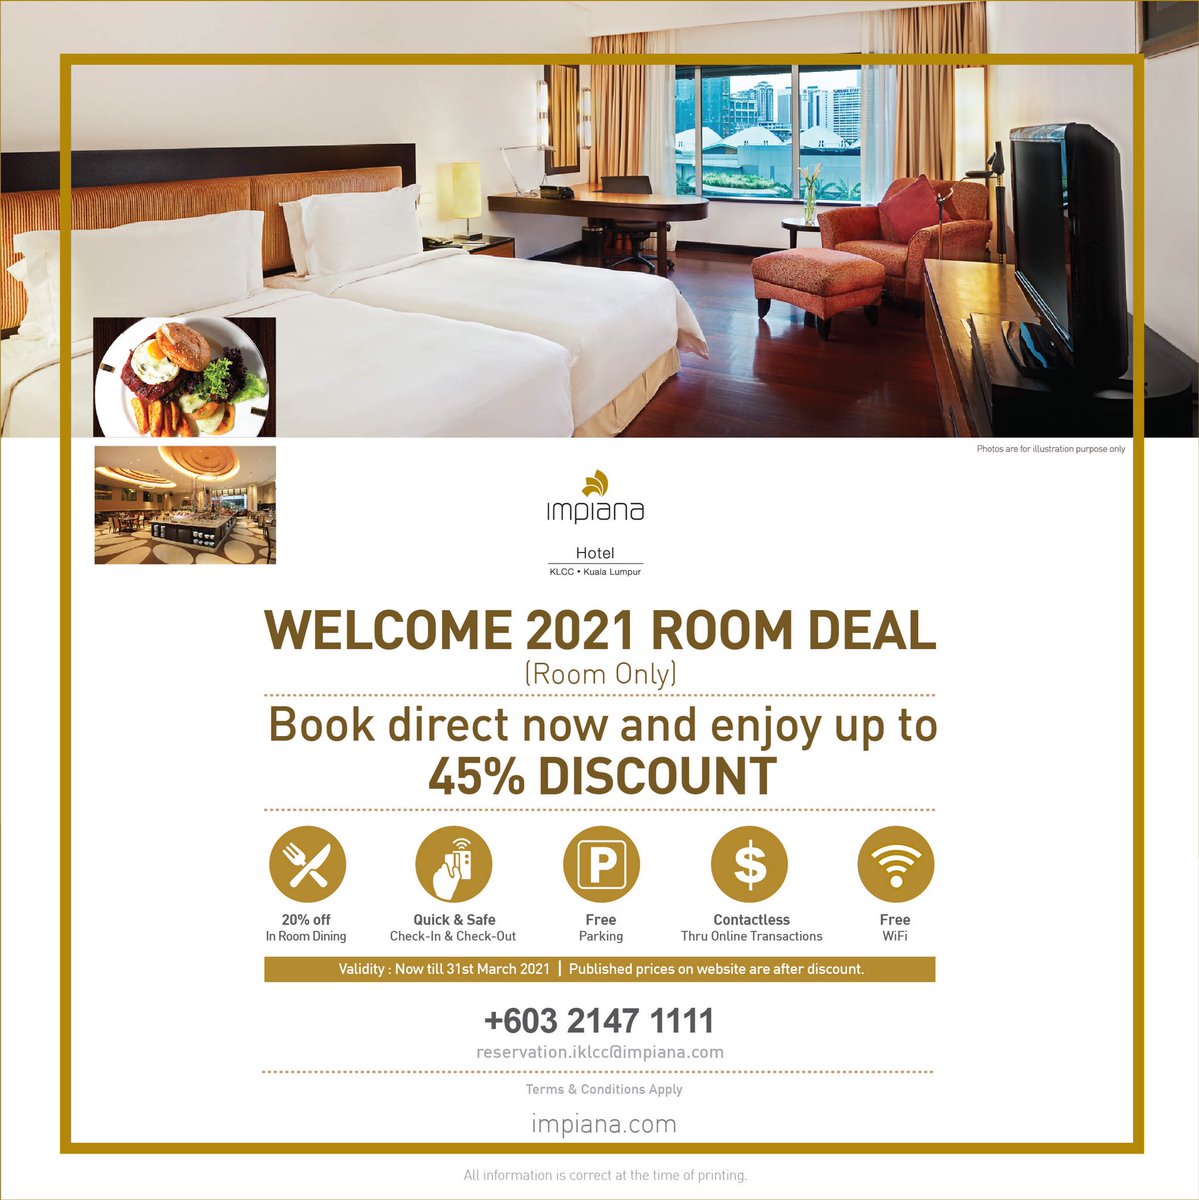 Uzivatel Impiana Klcc Hotel Na Twitteru We Welcome 21 With The Best Offering Yet Enjoy Up To 45 Discounts On Our Deluxe Room When You Book Direct Visit T Co 4pkadk4vwu Or Call Us